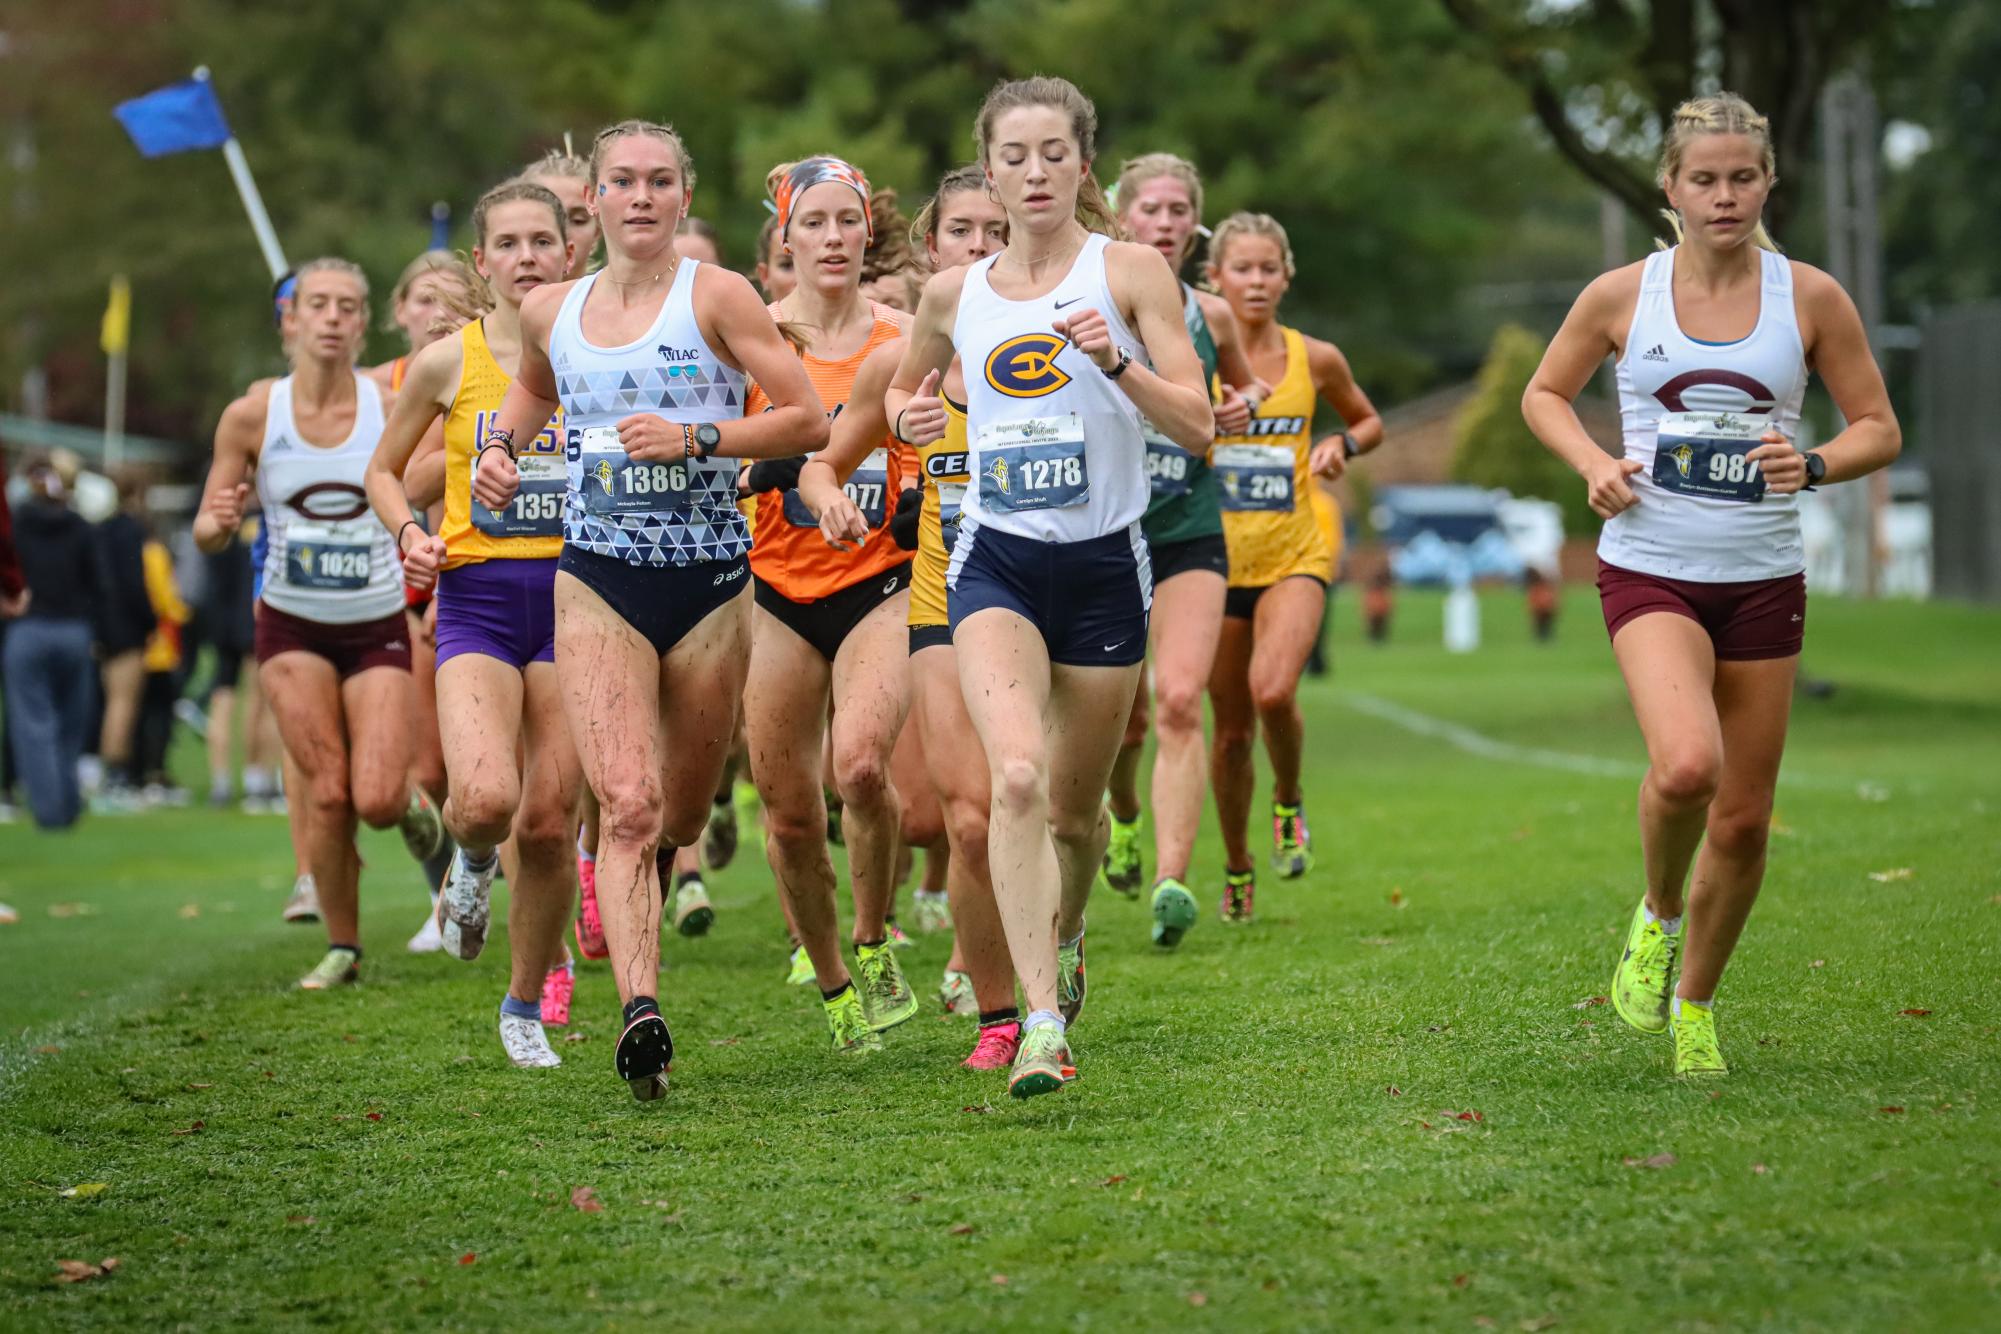 Both teams will continue to train and prepare for the conference competition they will be facing at WIAC. (Photo by Dan Schwamberger, UWEC Cross Country)